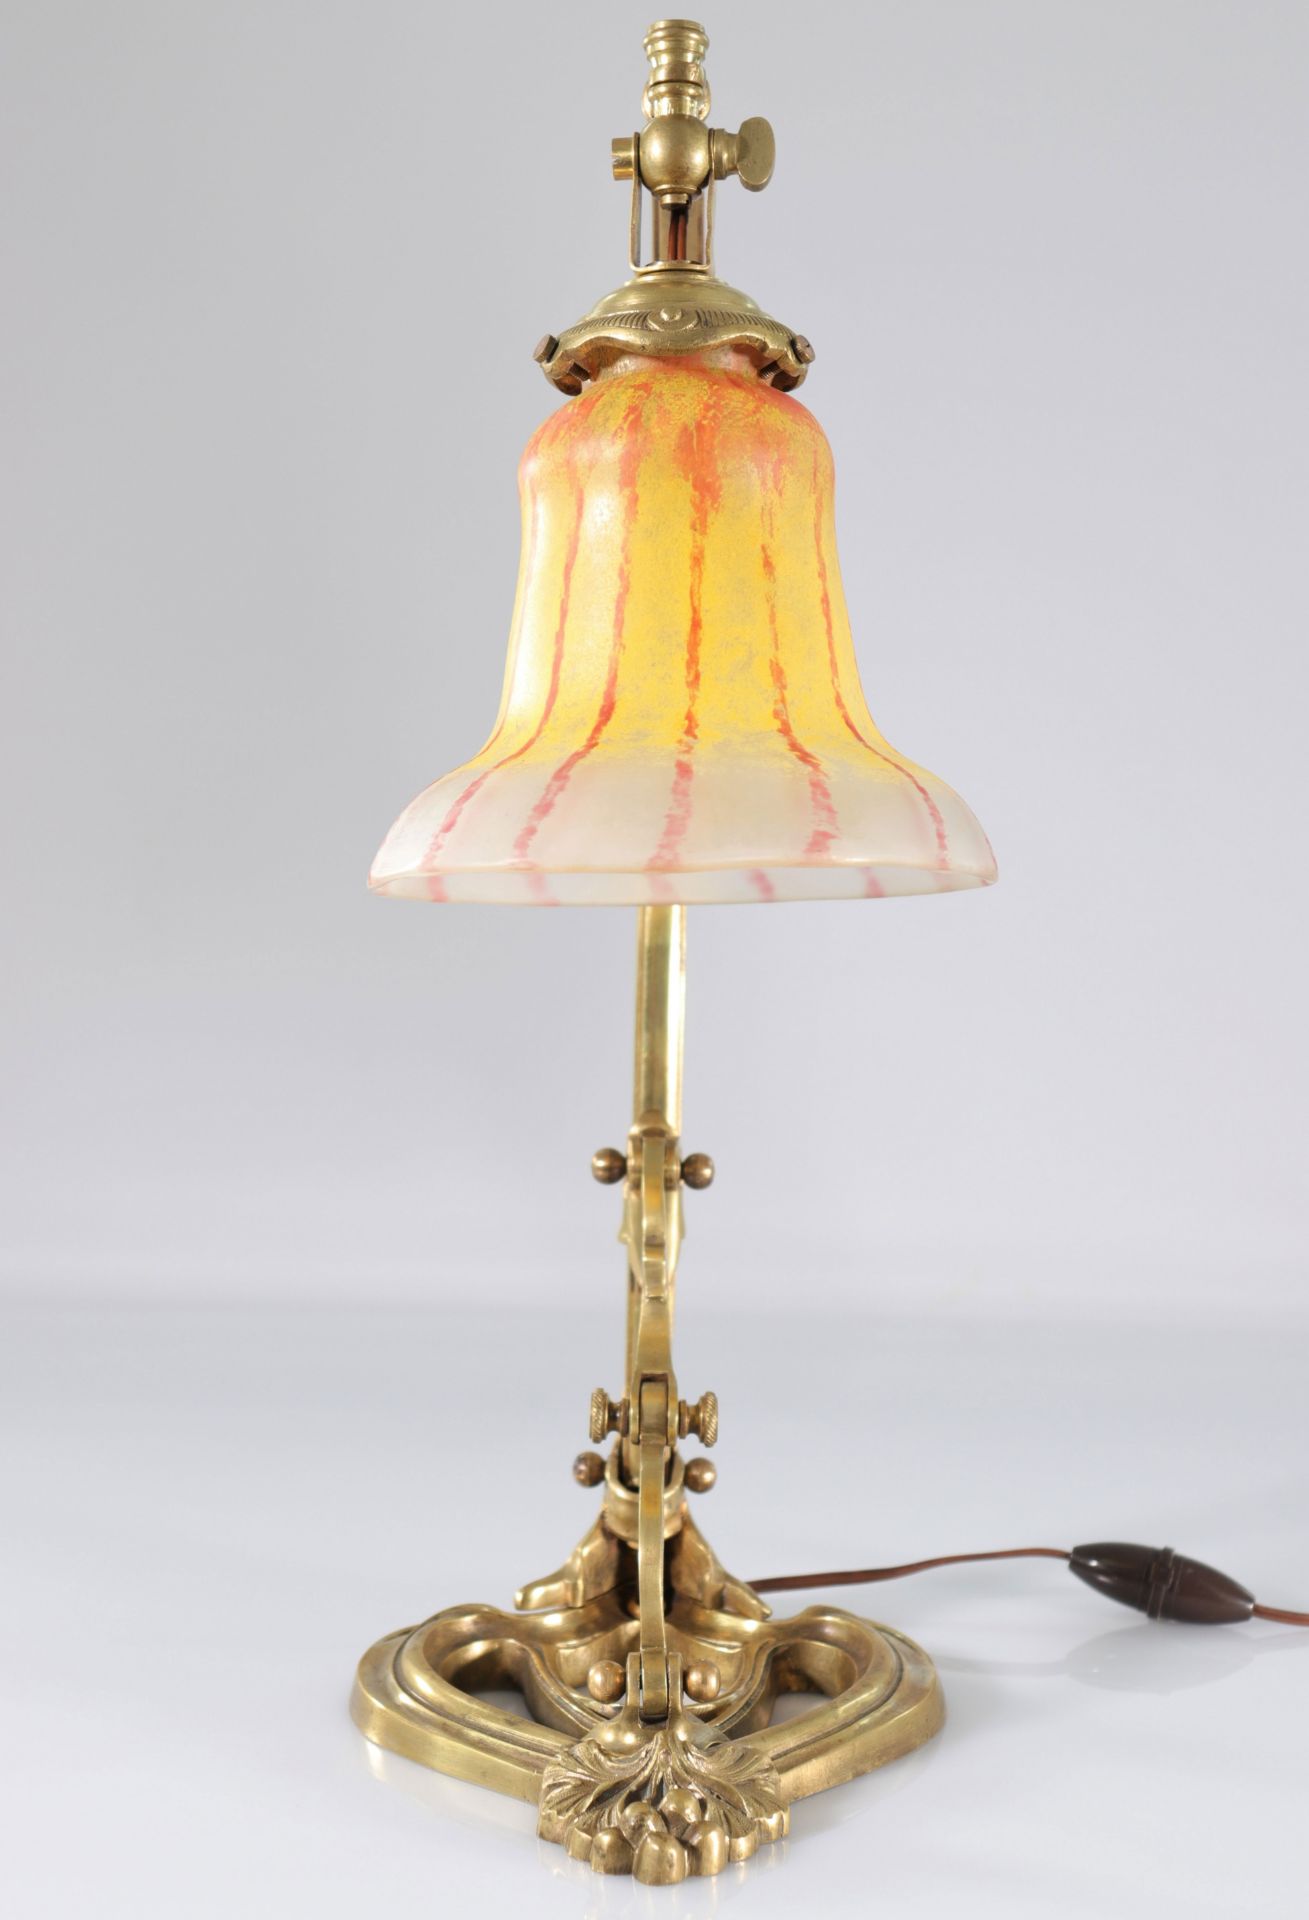 Large 1900 bronze foot lamp with ball joint, large red threaded DAUM tulip - Image 4 of 6